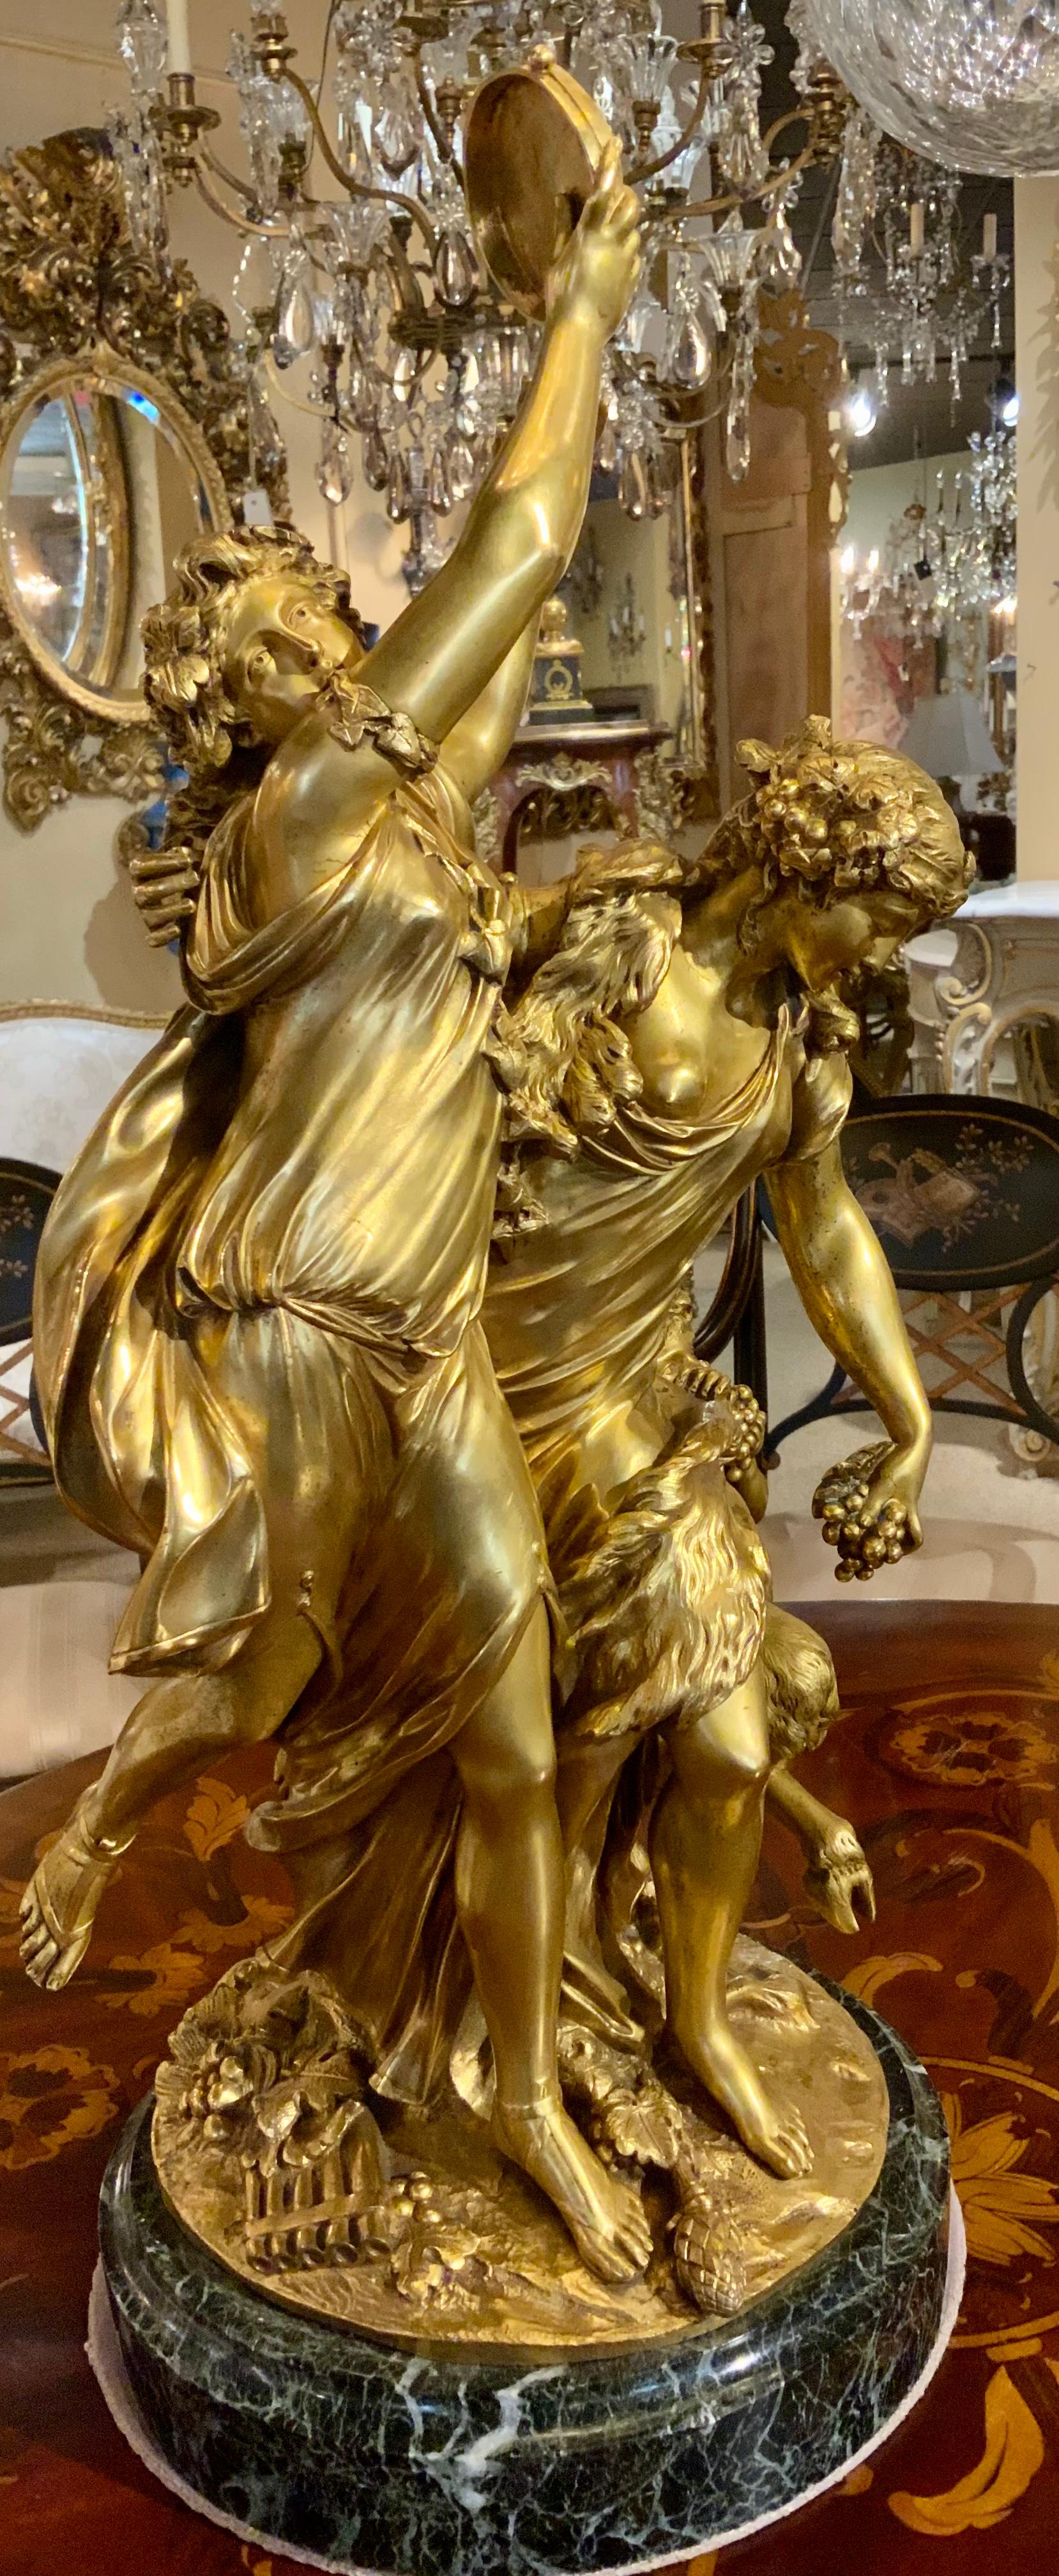 Fine gilt bronze statue “Bacchanale” after Claude Michel known as
clodion. He was a French sculptor born in 1738. It depicts two dancing
Bacchantes with a tambourine with a child satyr. Signed in the bronze
Clodion 1738 at the base on the back.